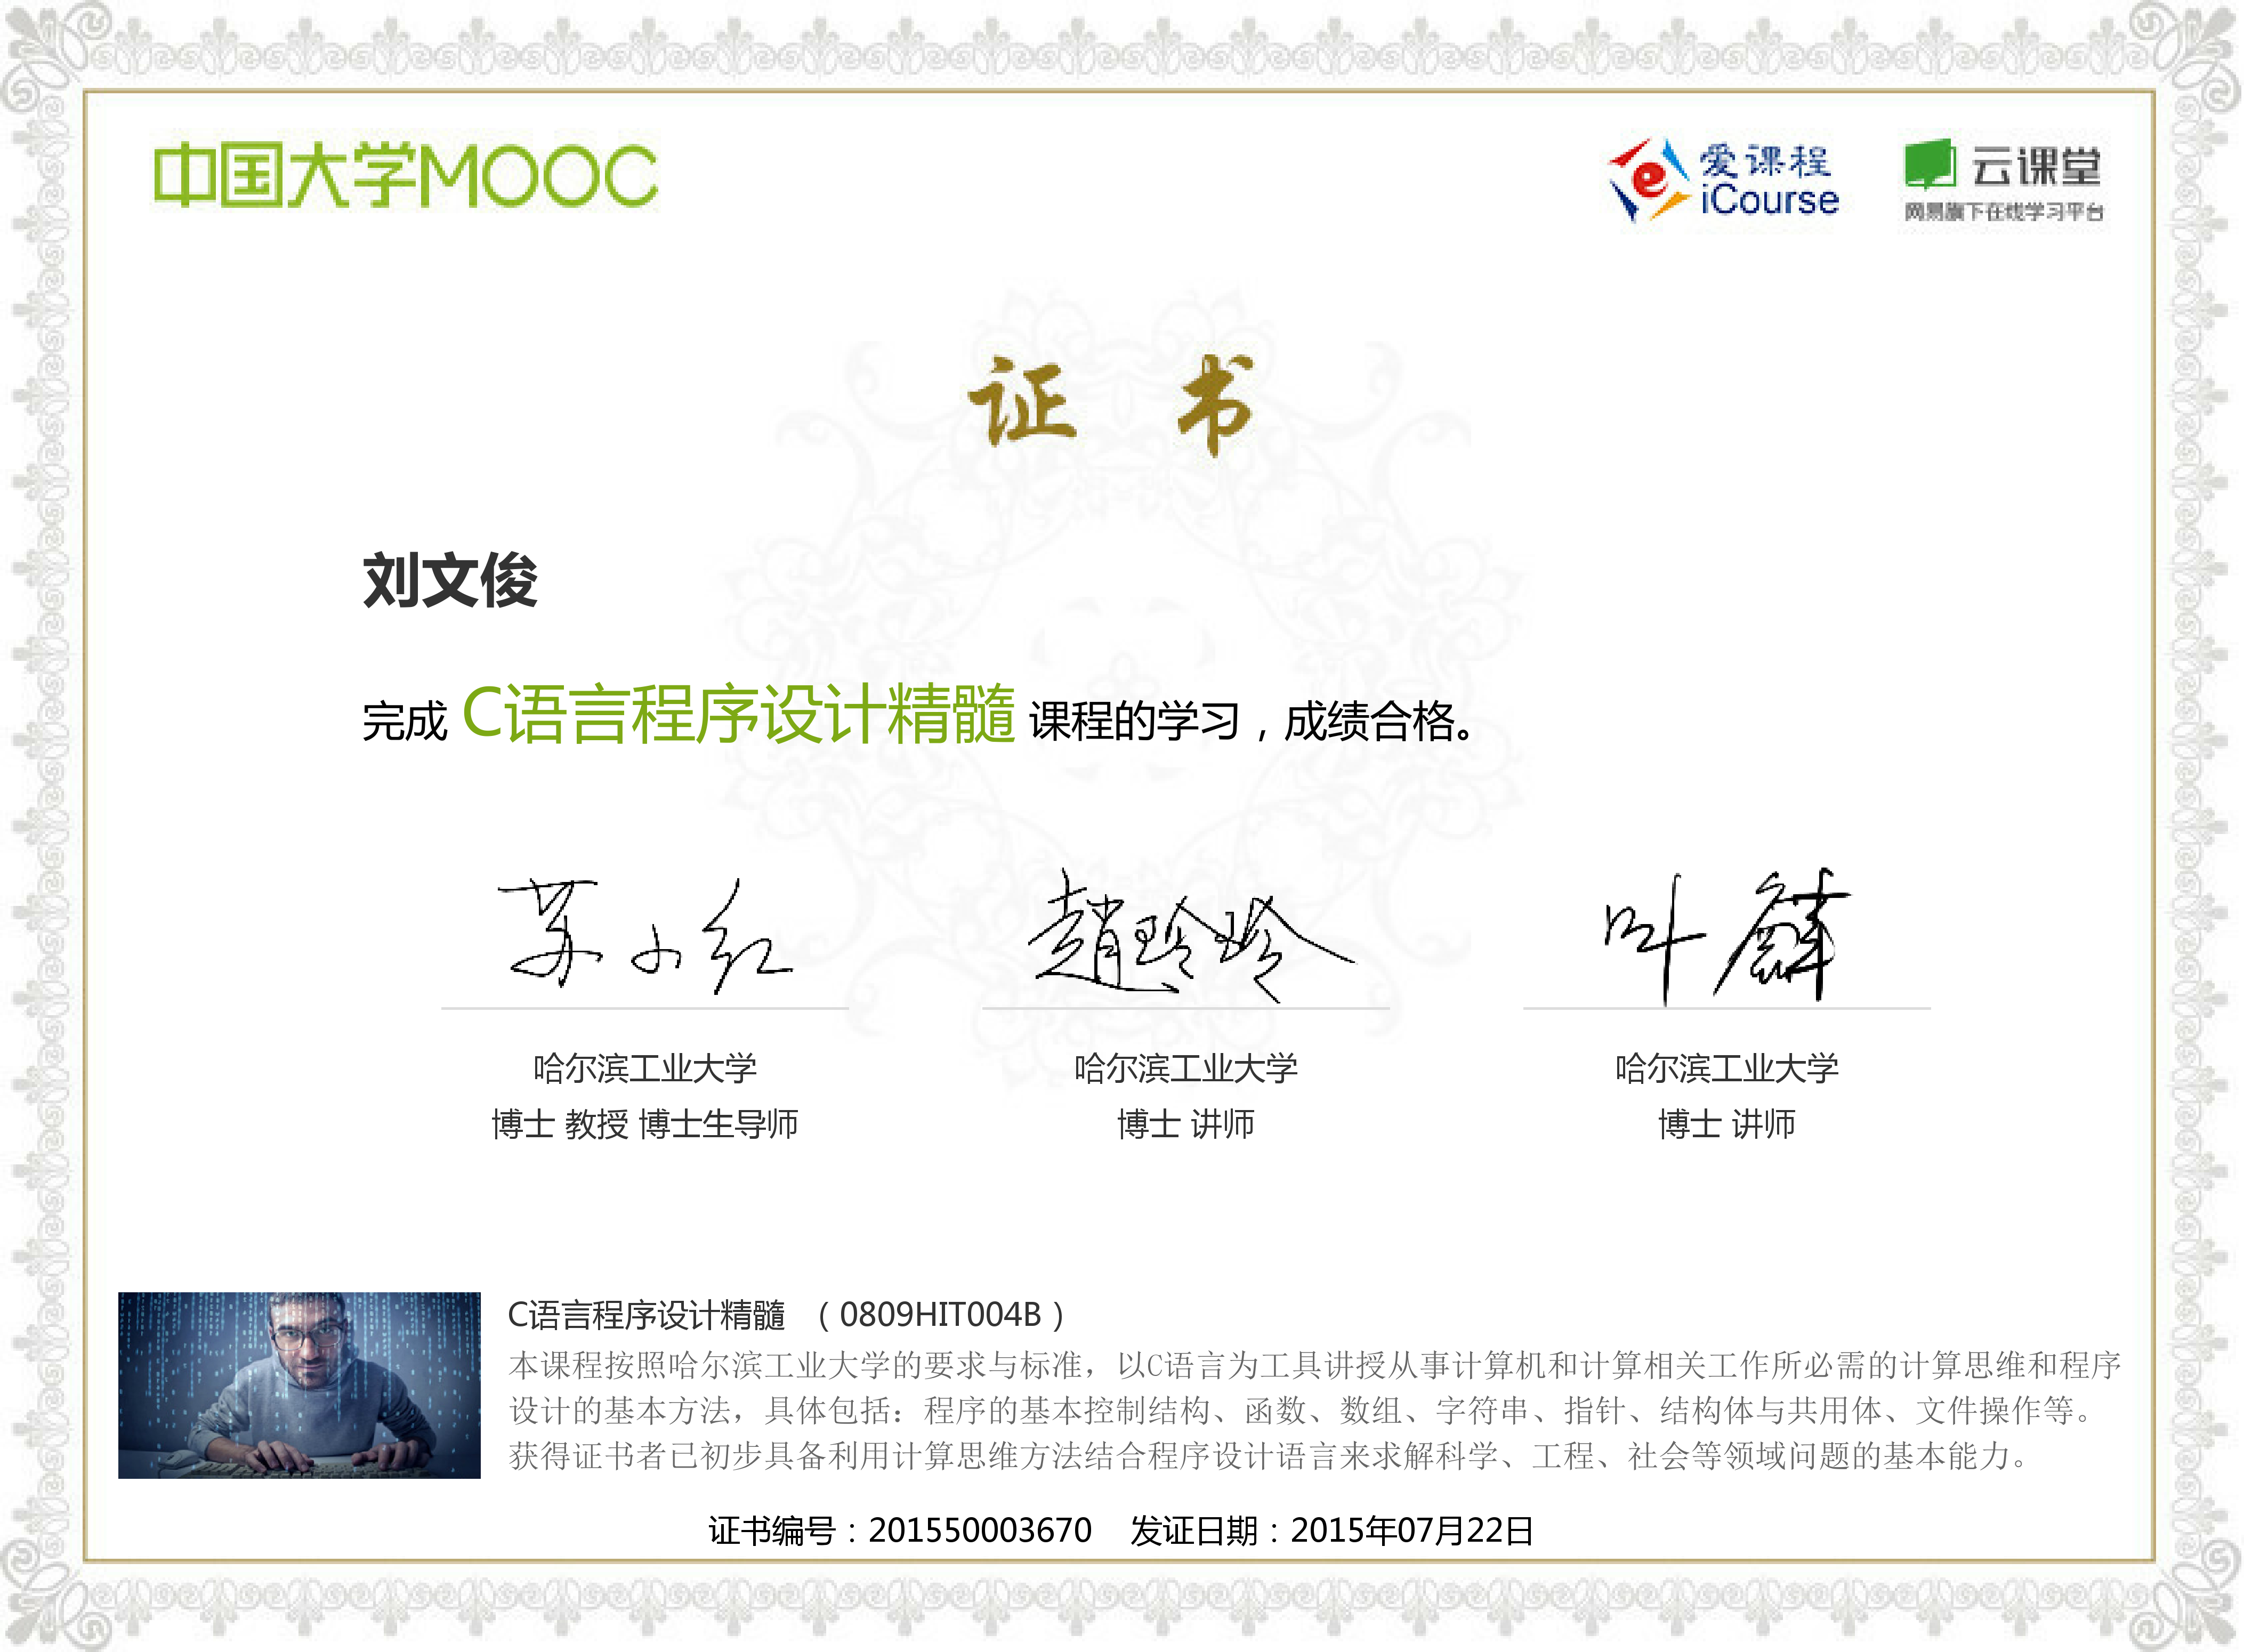 First Mooc certificare